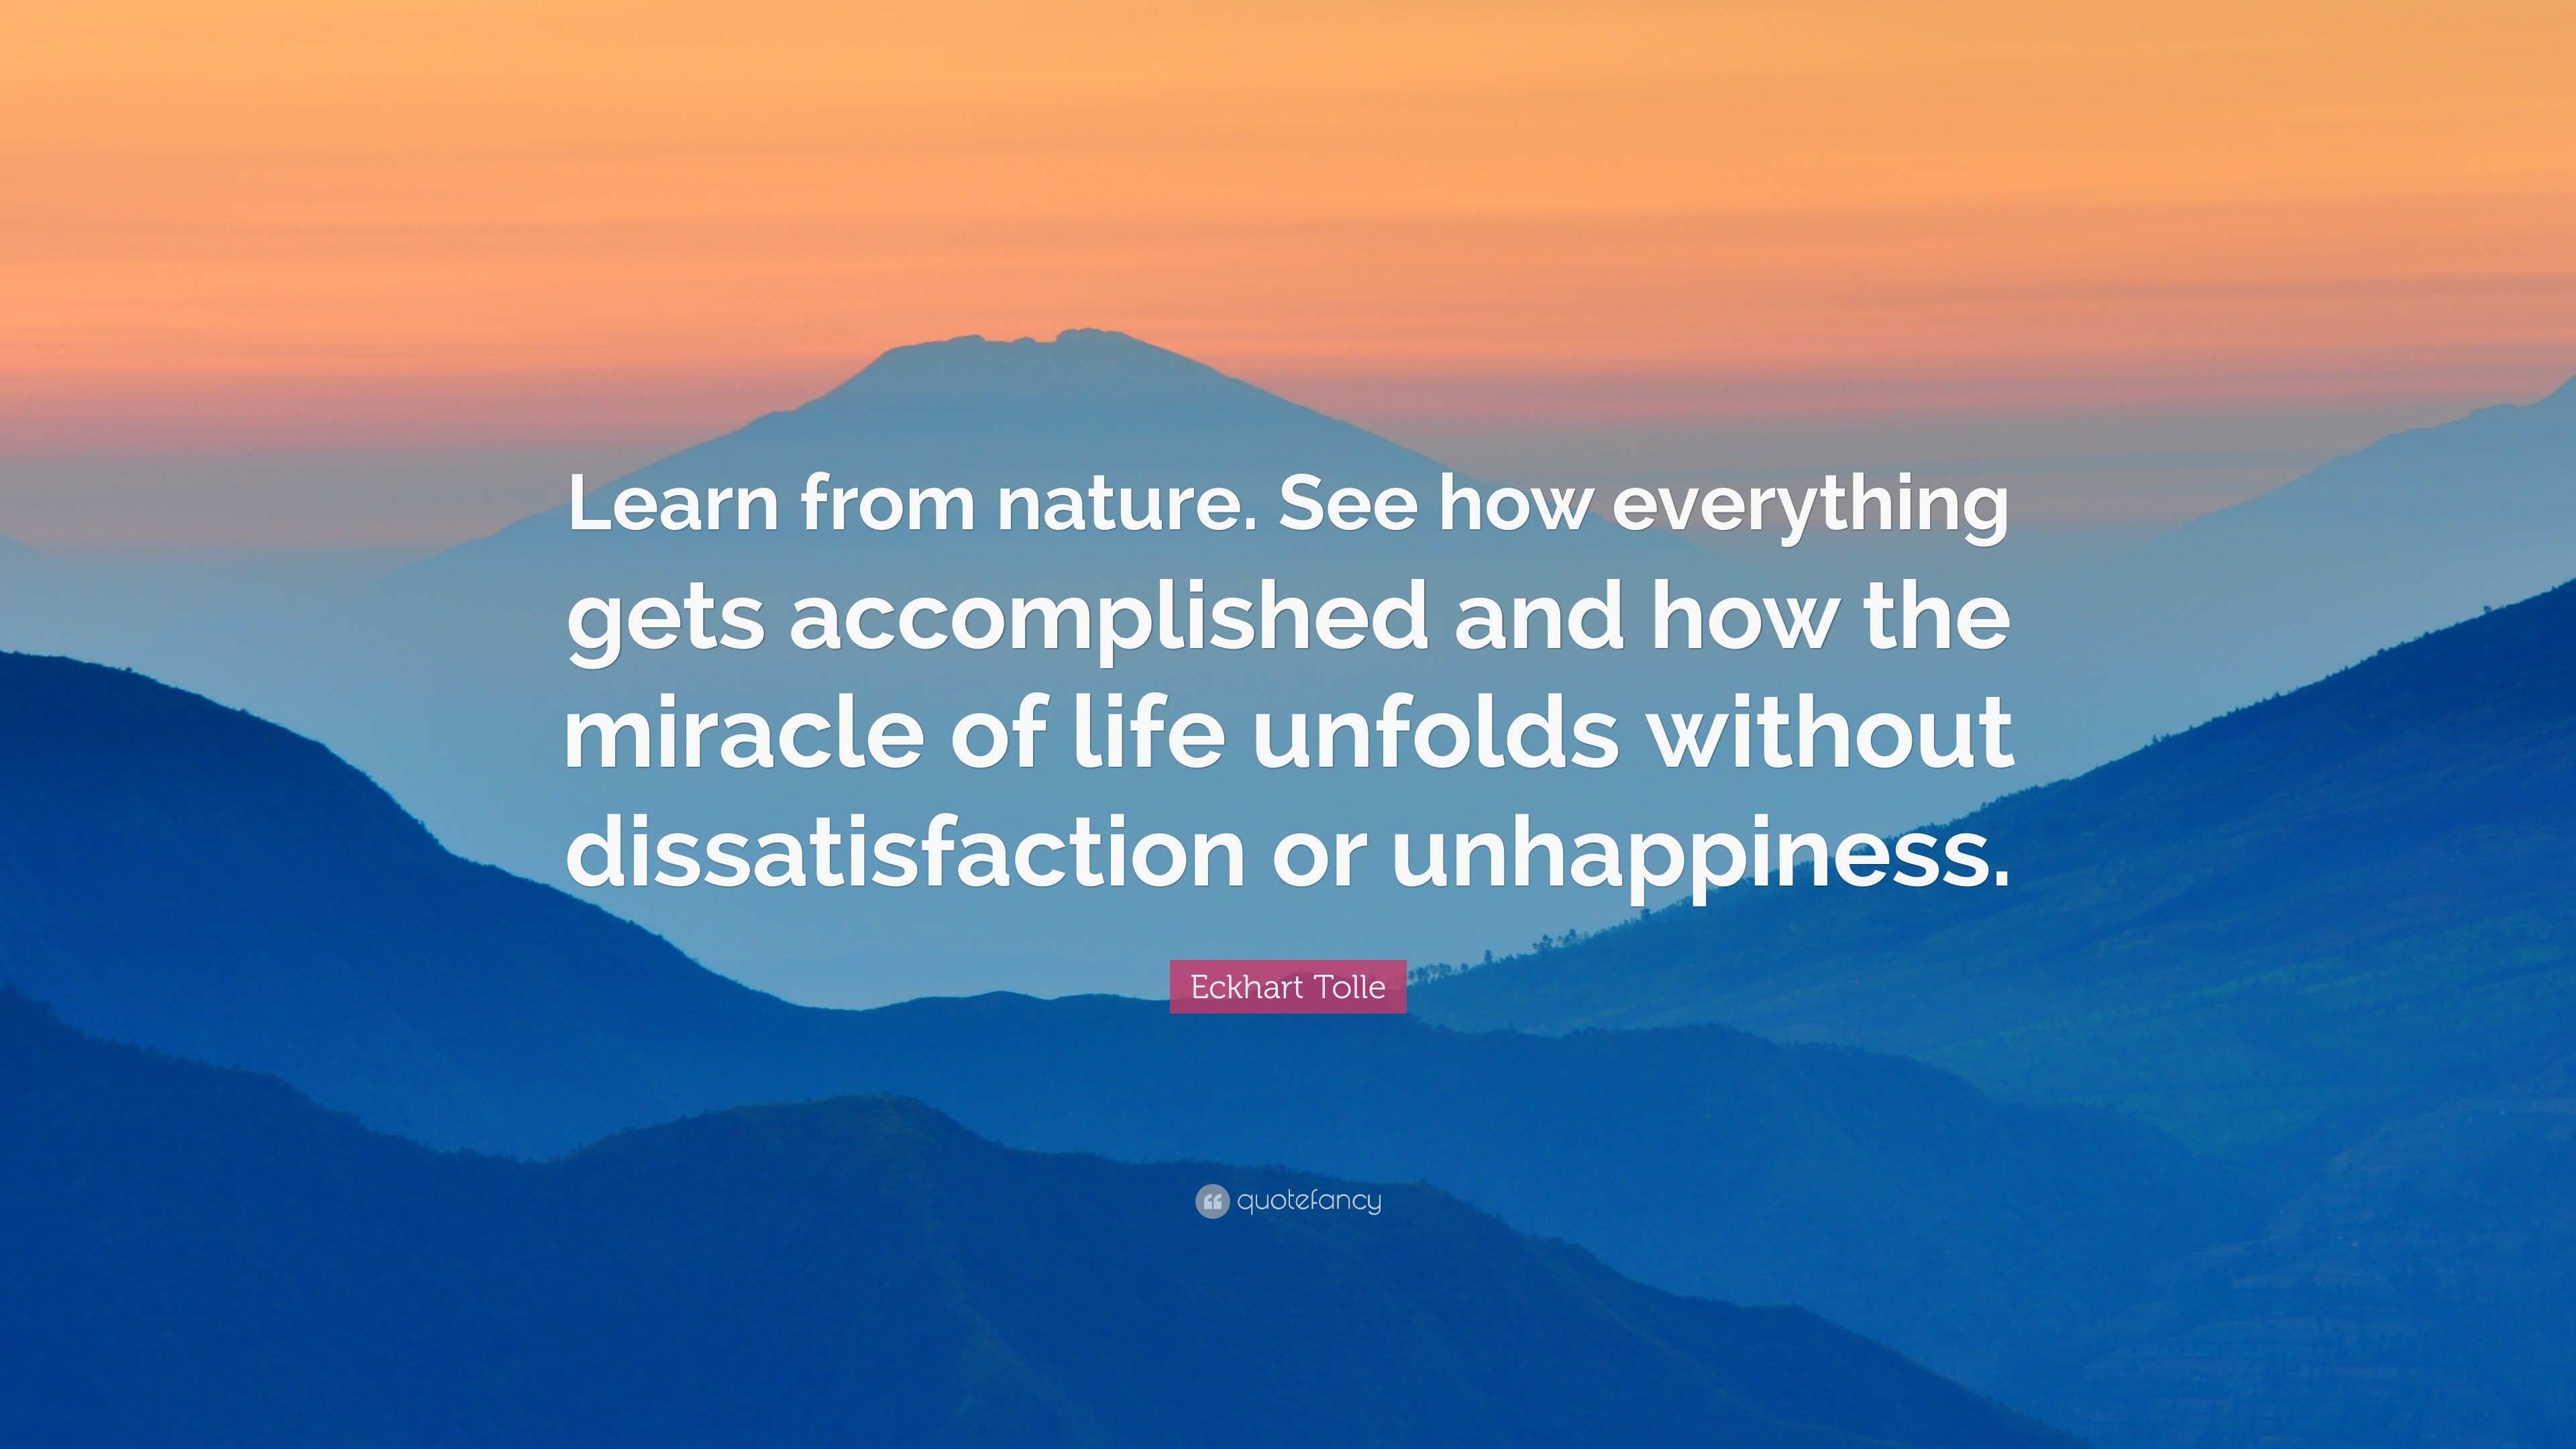 Eckhart Tolle Quote: “Learn from nature. See how everything gets accomplished and how the miracle of life unfolds without or u...”